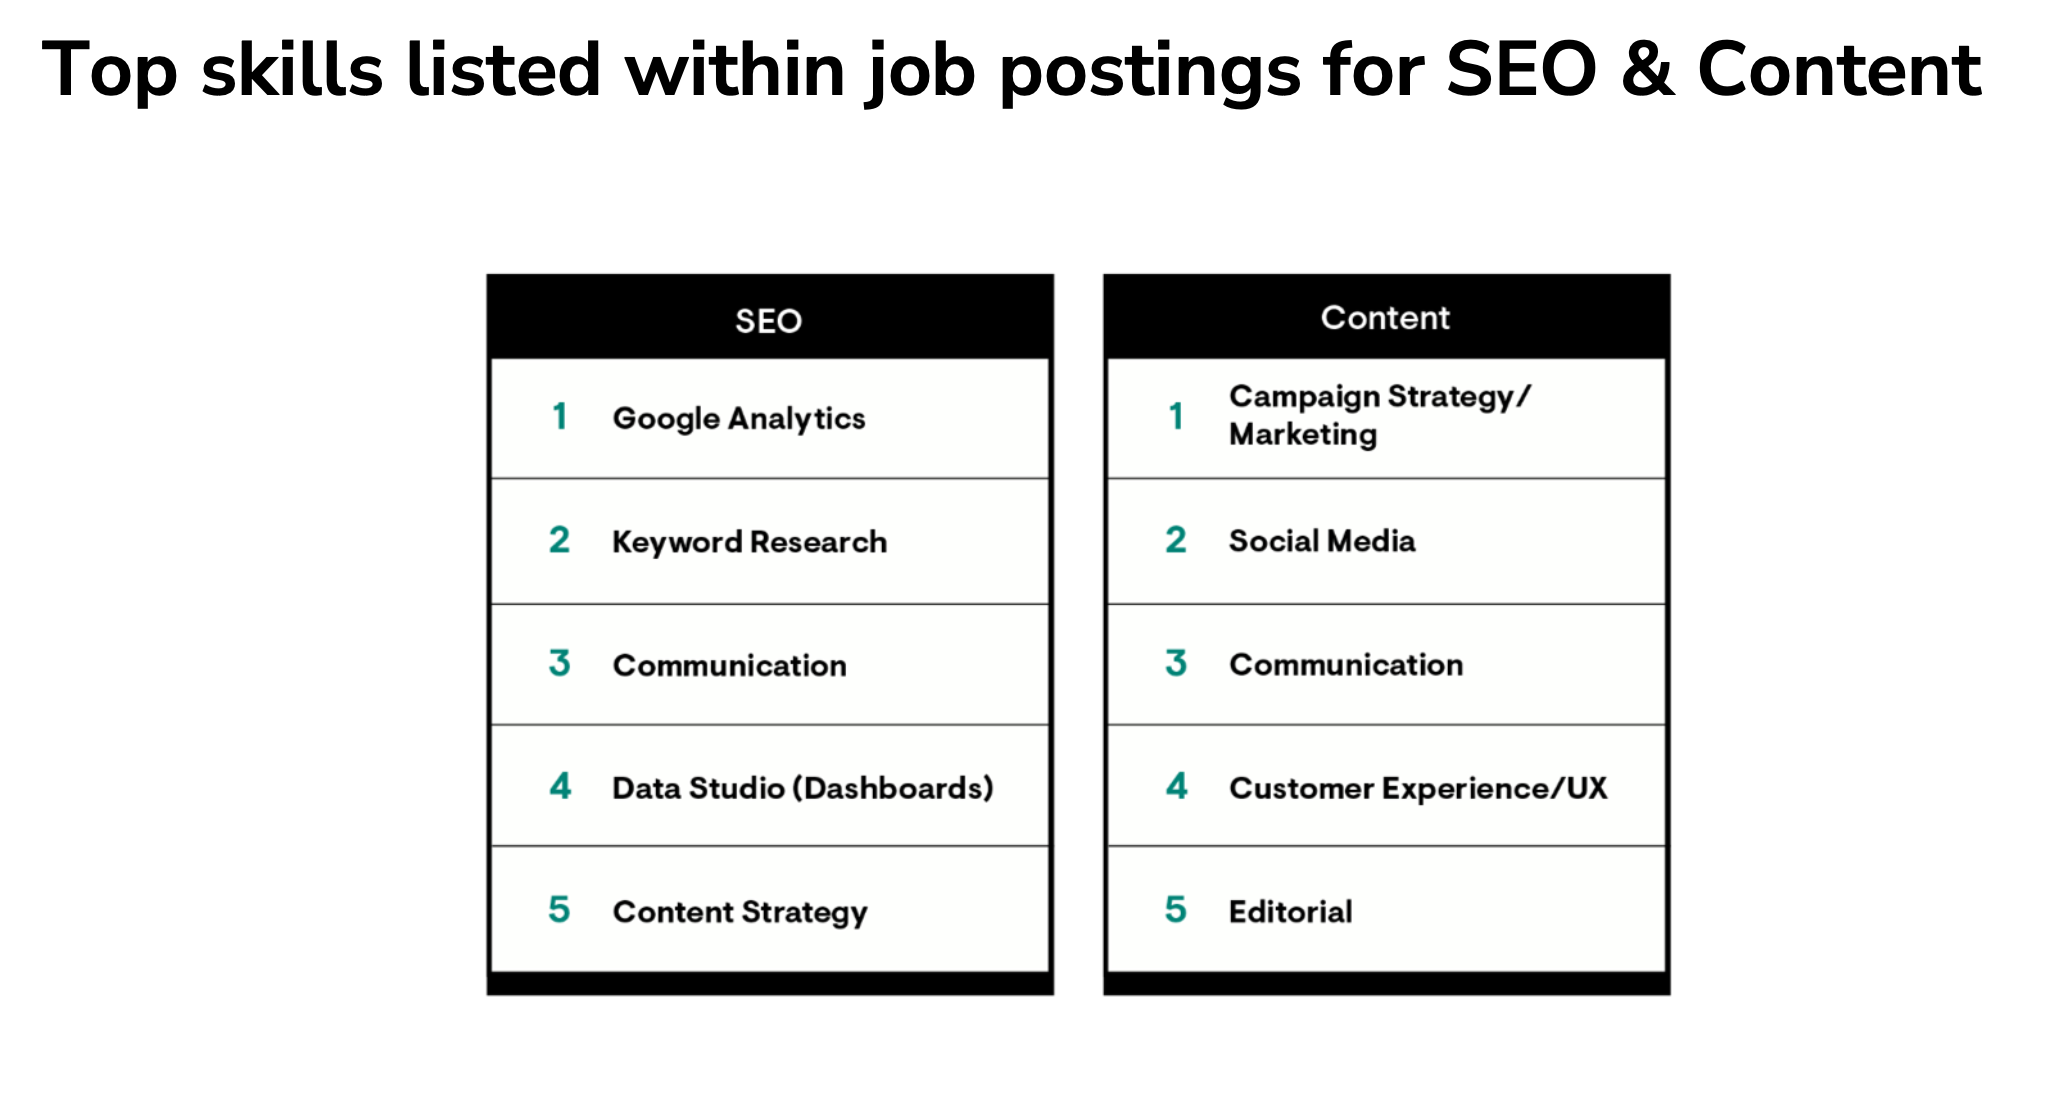 How to hire the best SEO and content marketing talent in 2023